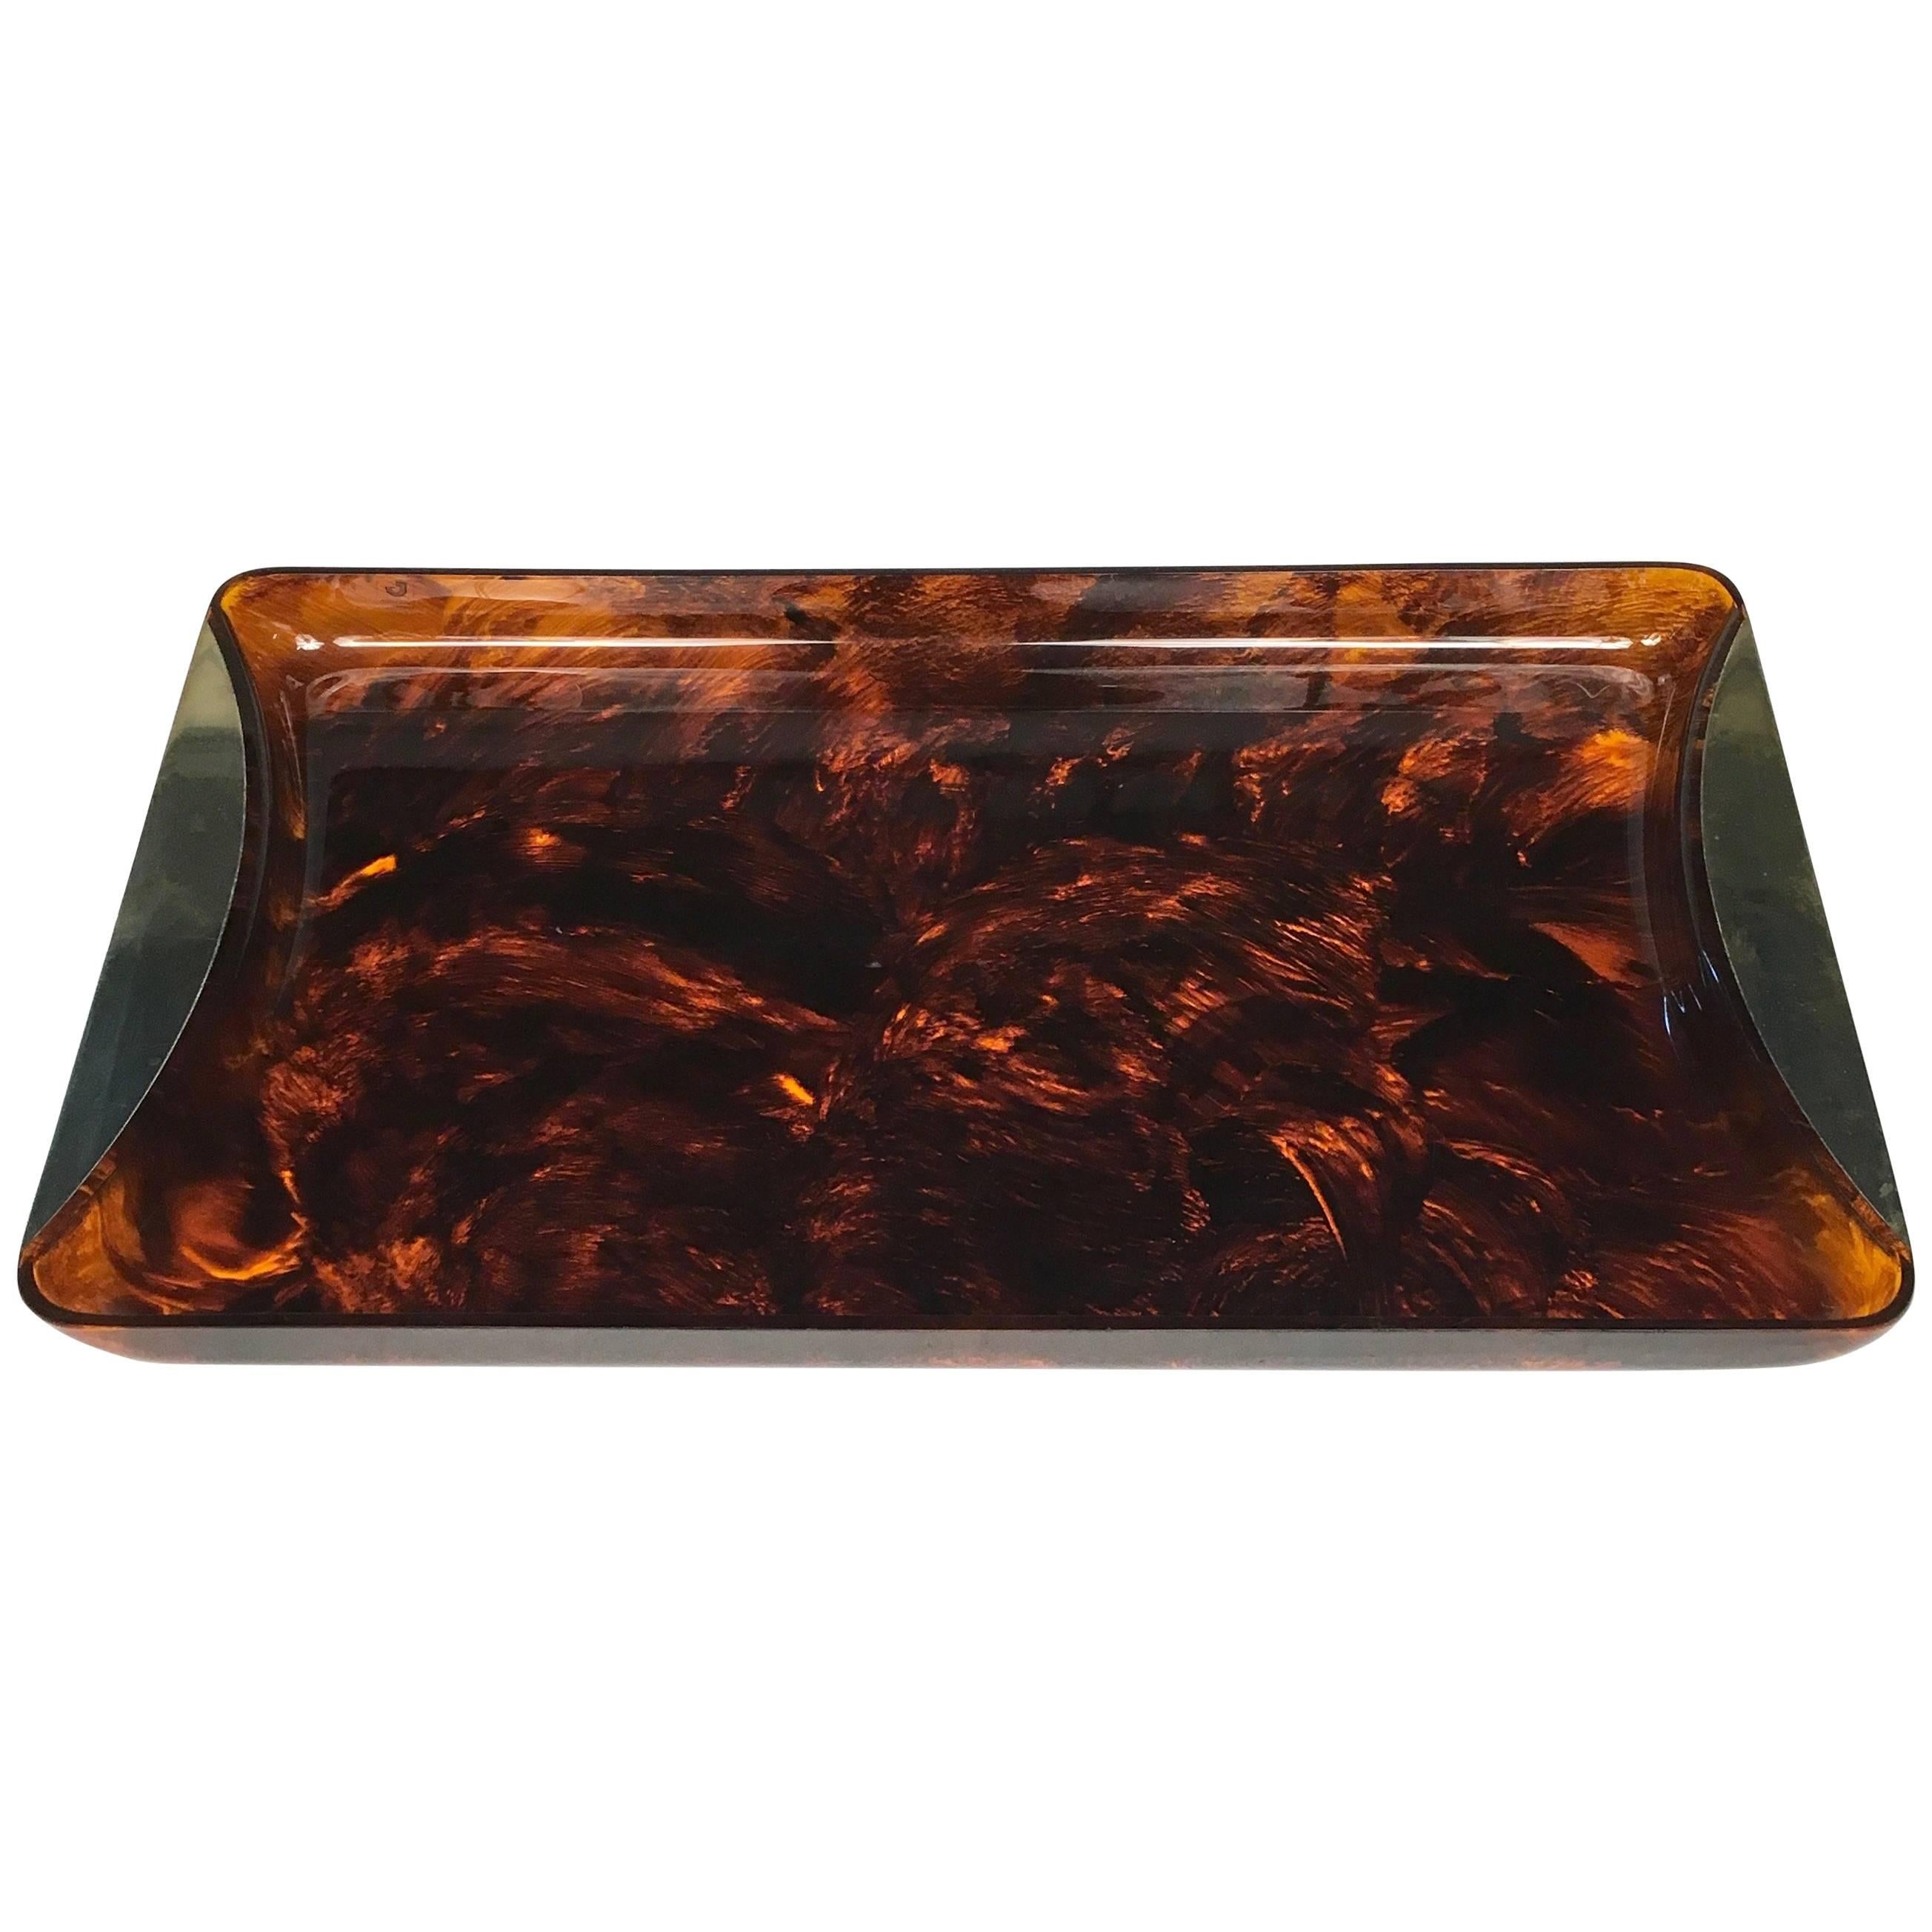 Tortoiseshell Serving Tray Made of Lucite and Brass by Guzzini